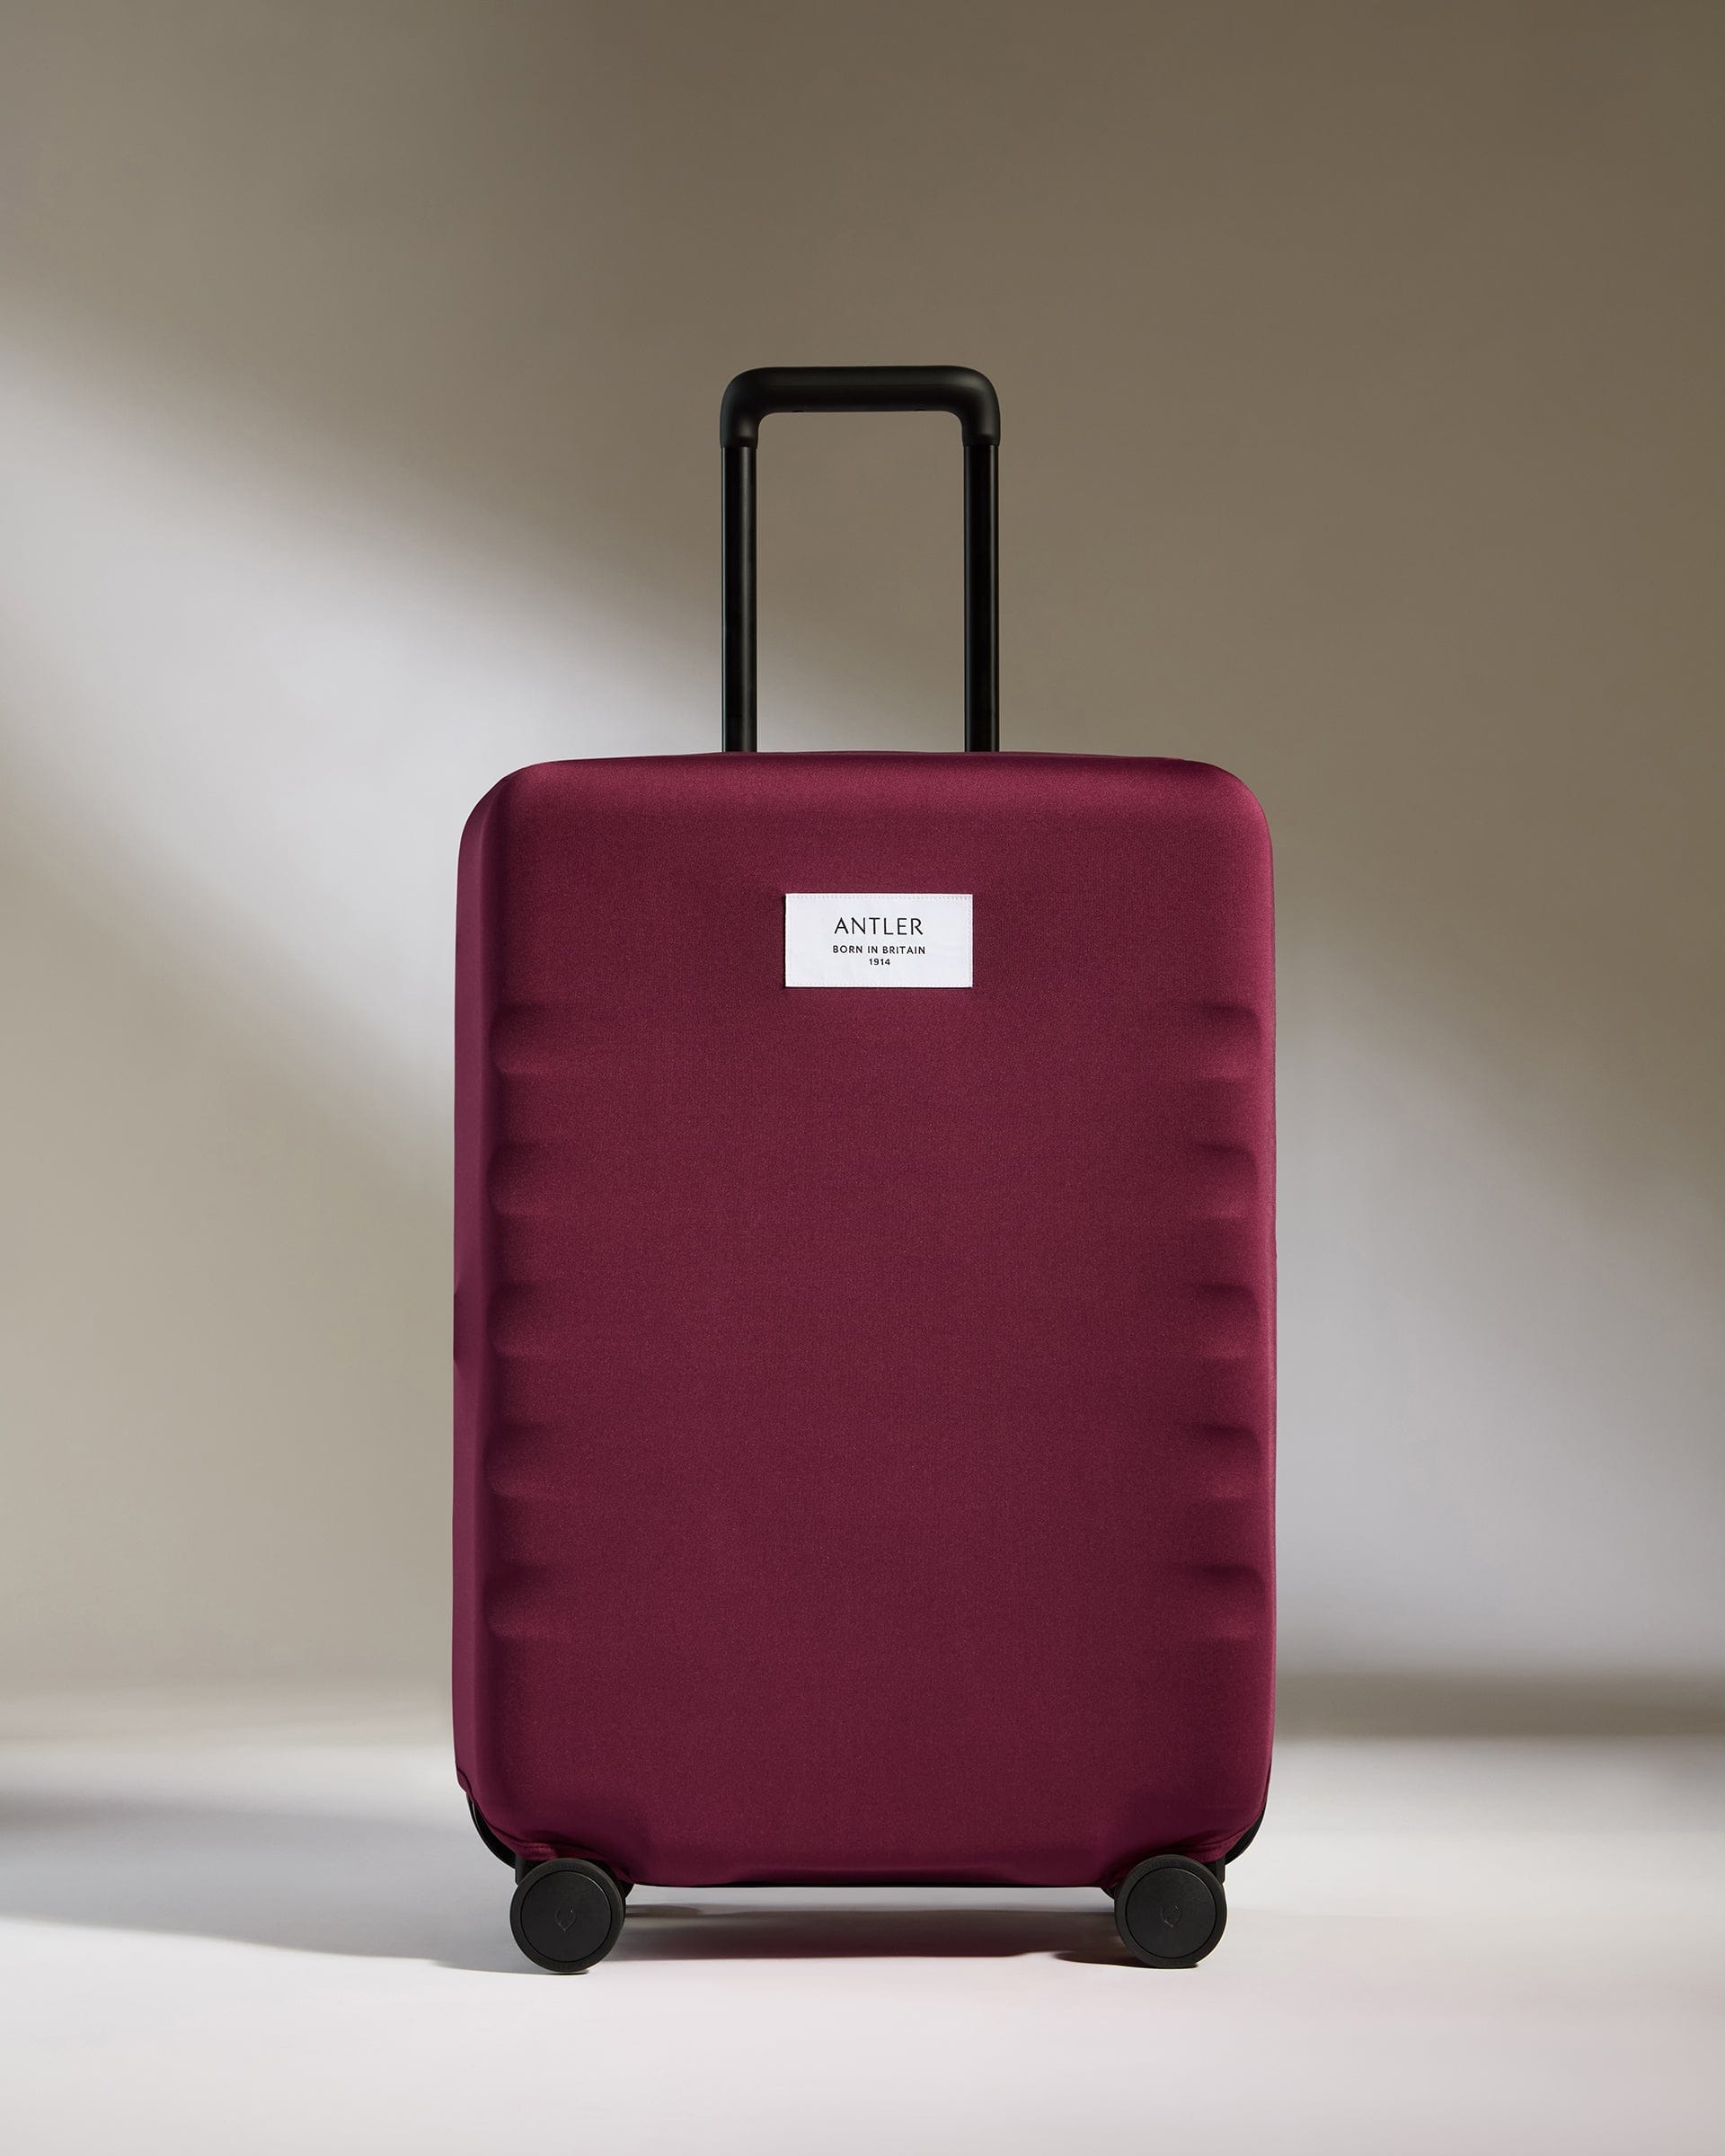 Antler Luggage -  Luggage Cover Medium in Heather Purple - Travel Accessories